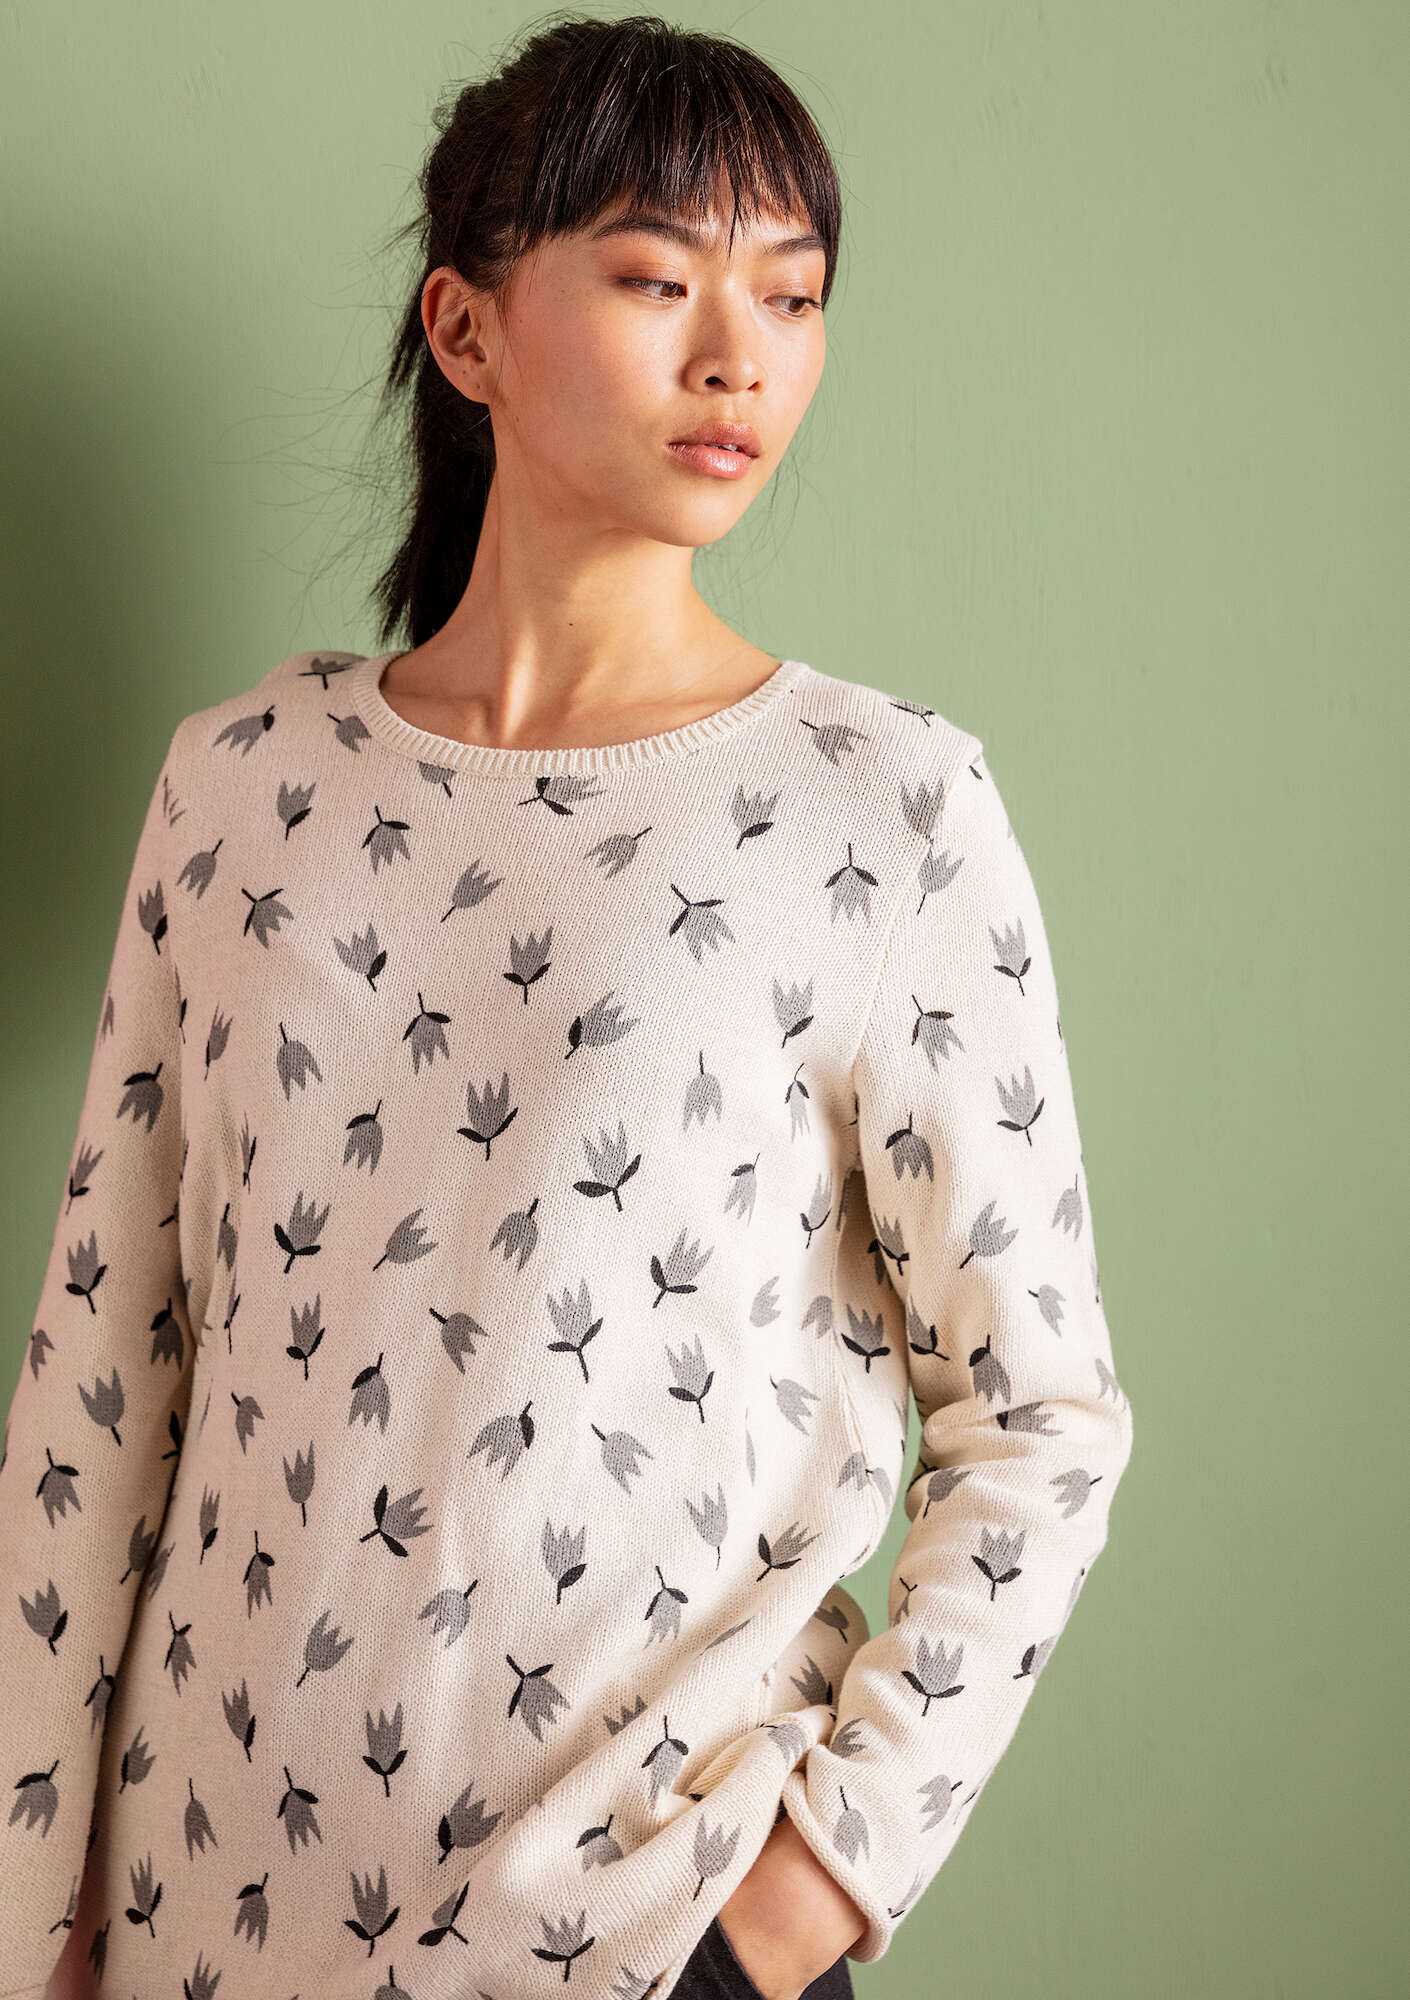 “Adena” BÄSTIS sweater in recycled cotton elephant gray/patterned thumbnail